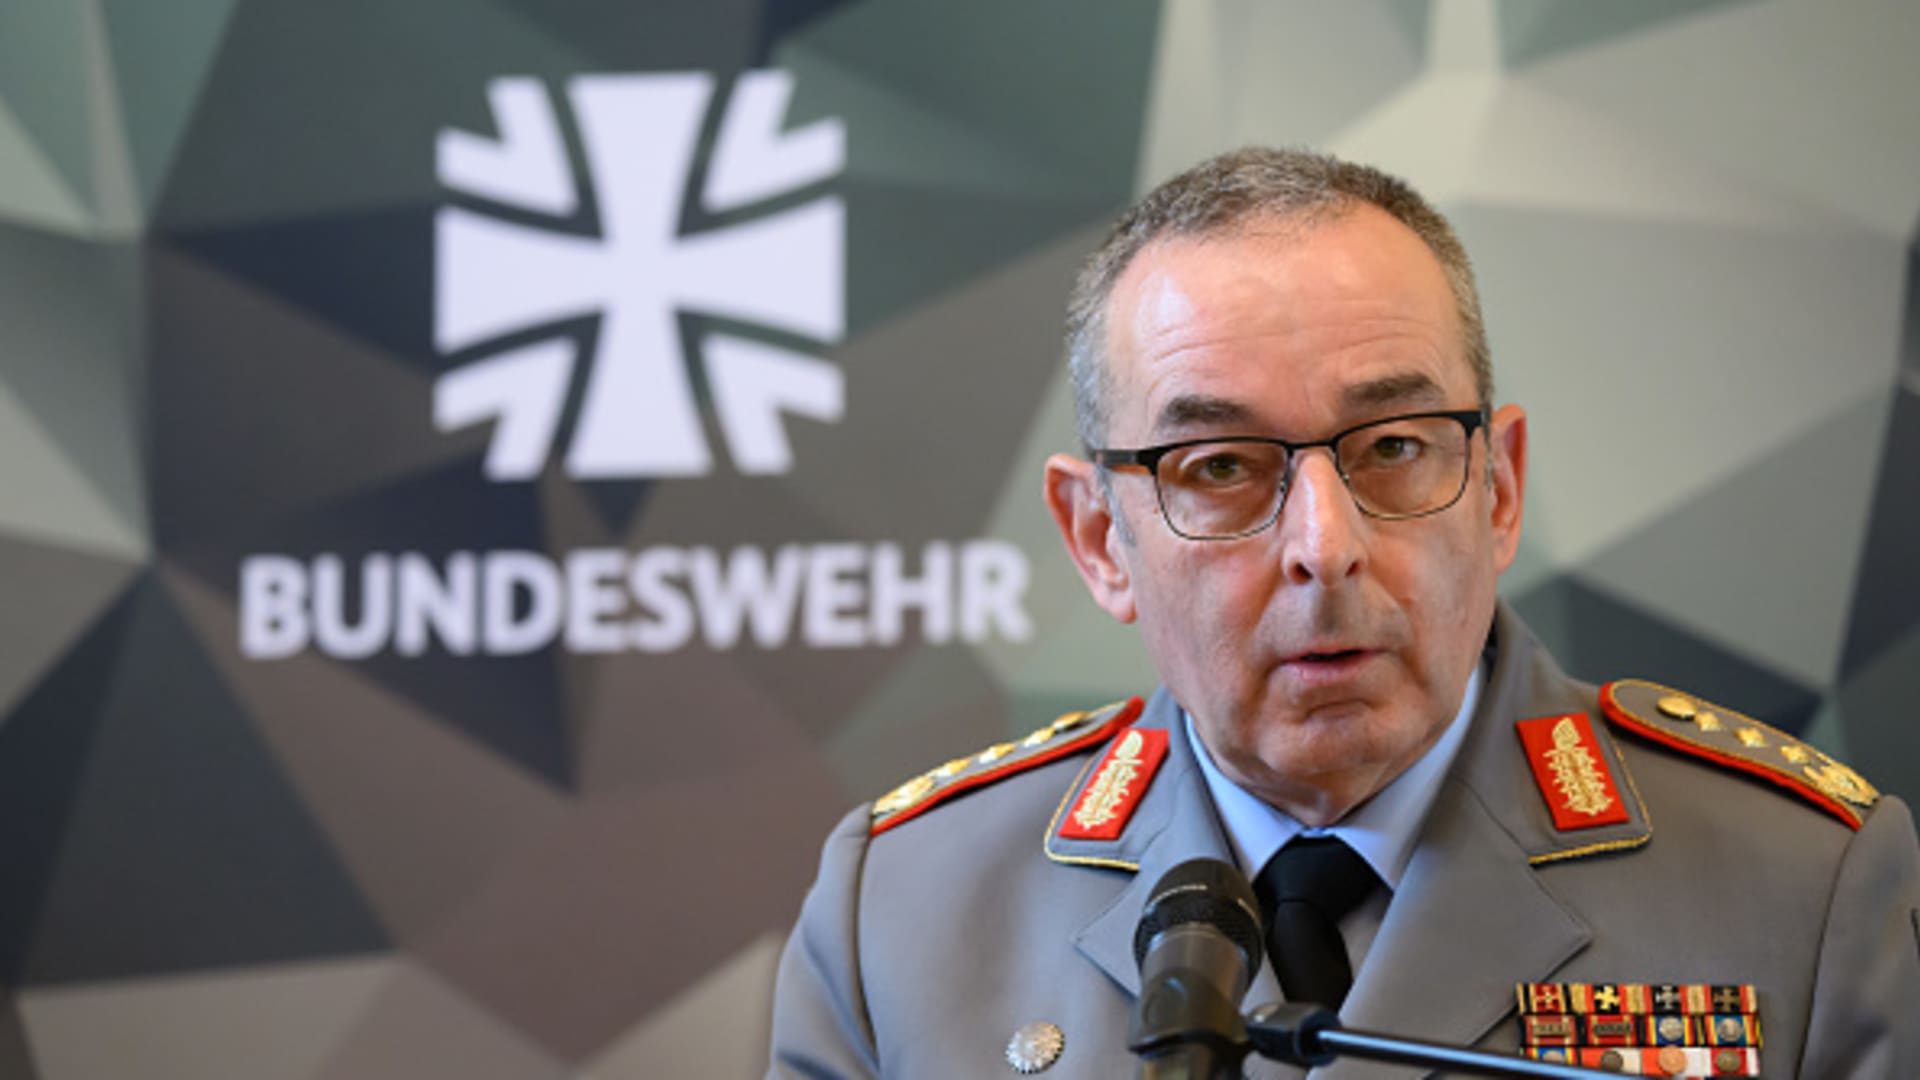 Carsten Breuer, Inspector General of the Bundeswehr, speaks to journalists during the press conference for the meeting of the Saxon Cabinet in the Scharnhorst Hall at the Army Officers' School. 